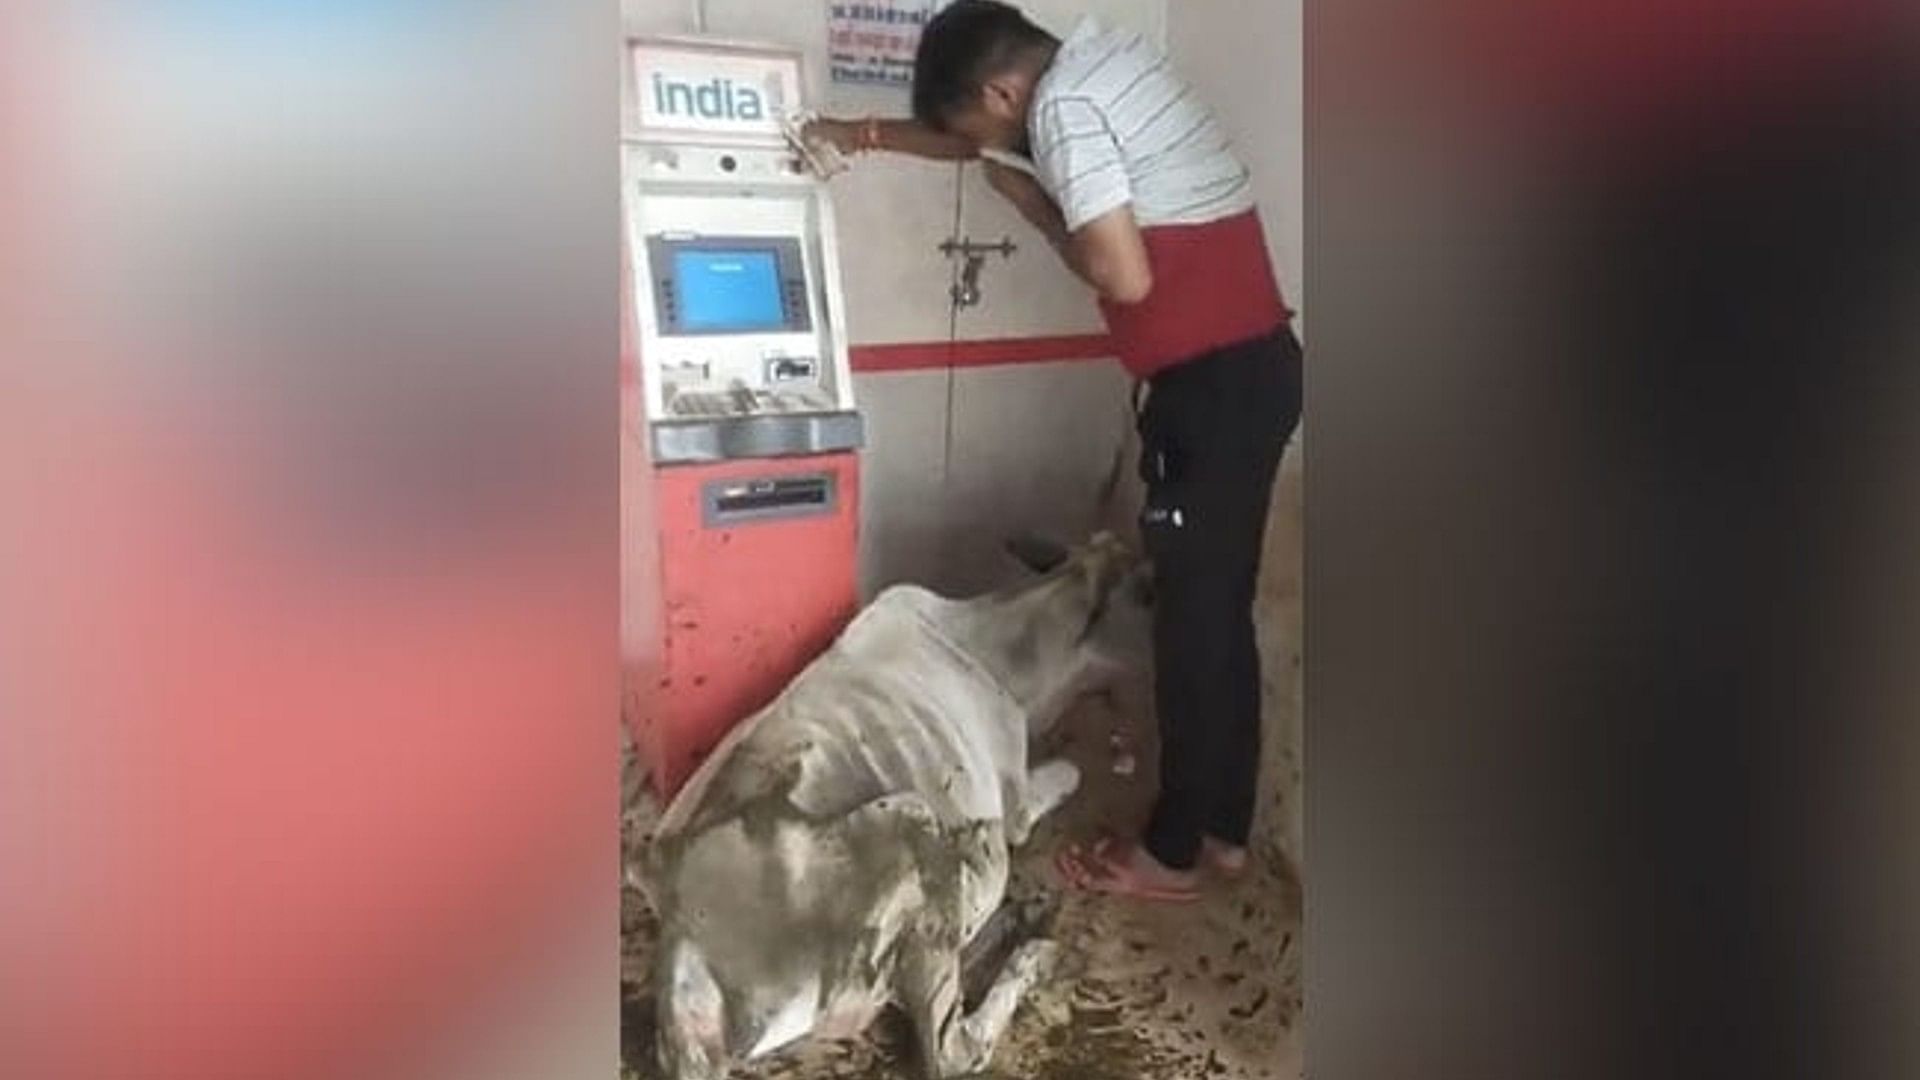 atm cow dung viral video mp rewa cow did dung in atm man took out money by closing his nose